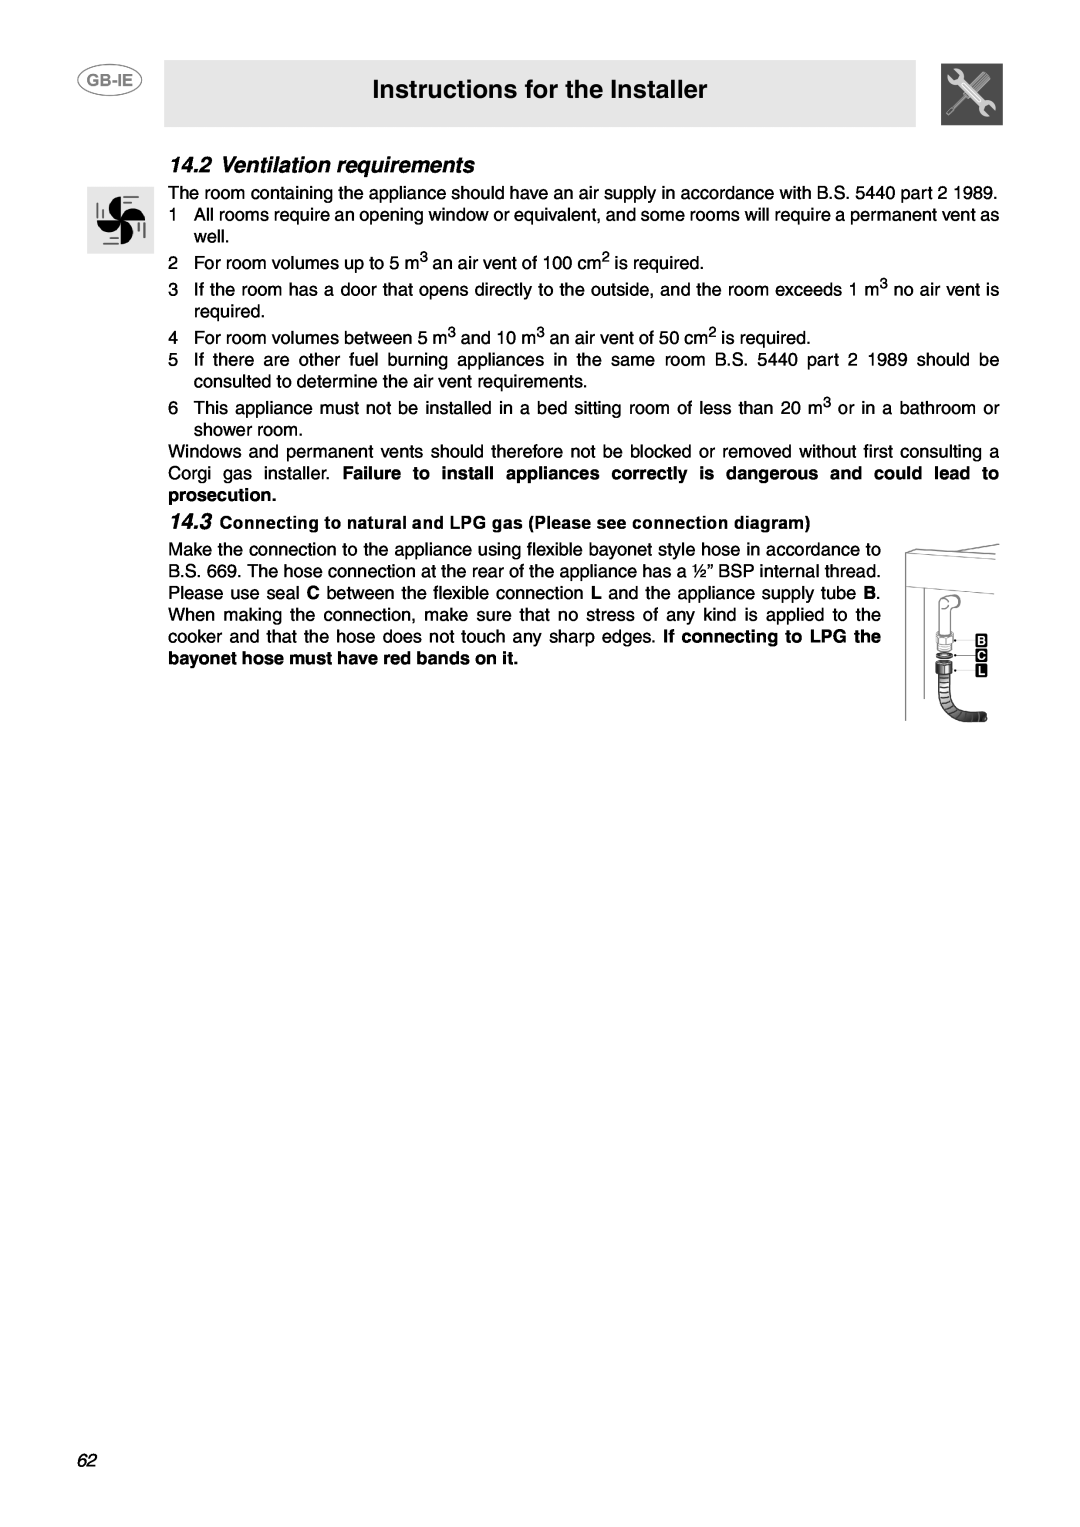 Smeg CP60X6 manual Ventilation requirements, Instructions for the Installer 